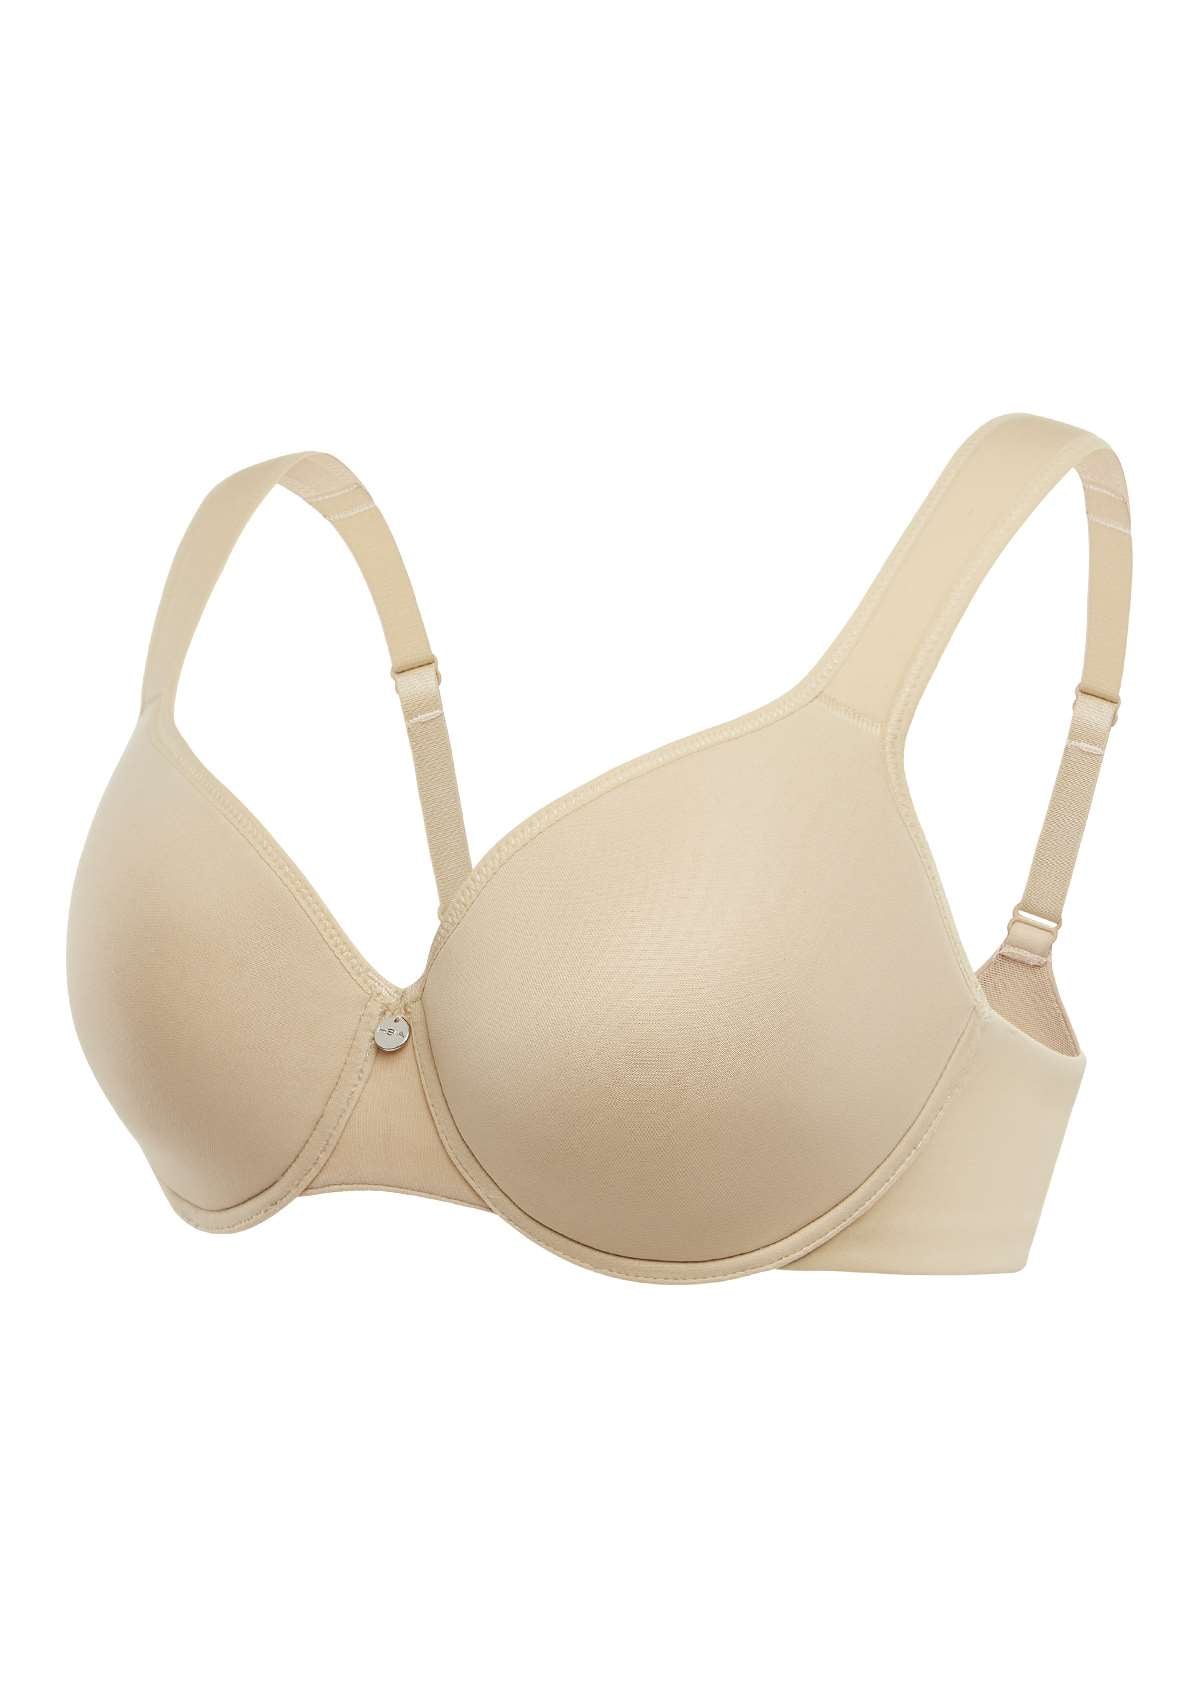 HSIA Patricia Seamless Lightly Padded Minimizer Bra -for Bigger Busts - Beige / 38 / C